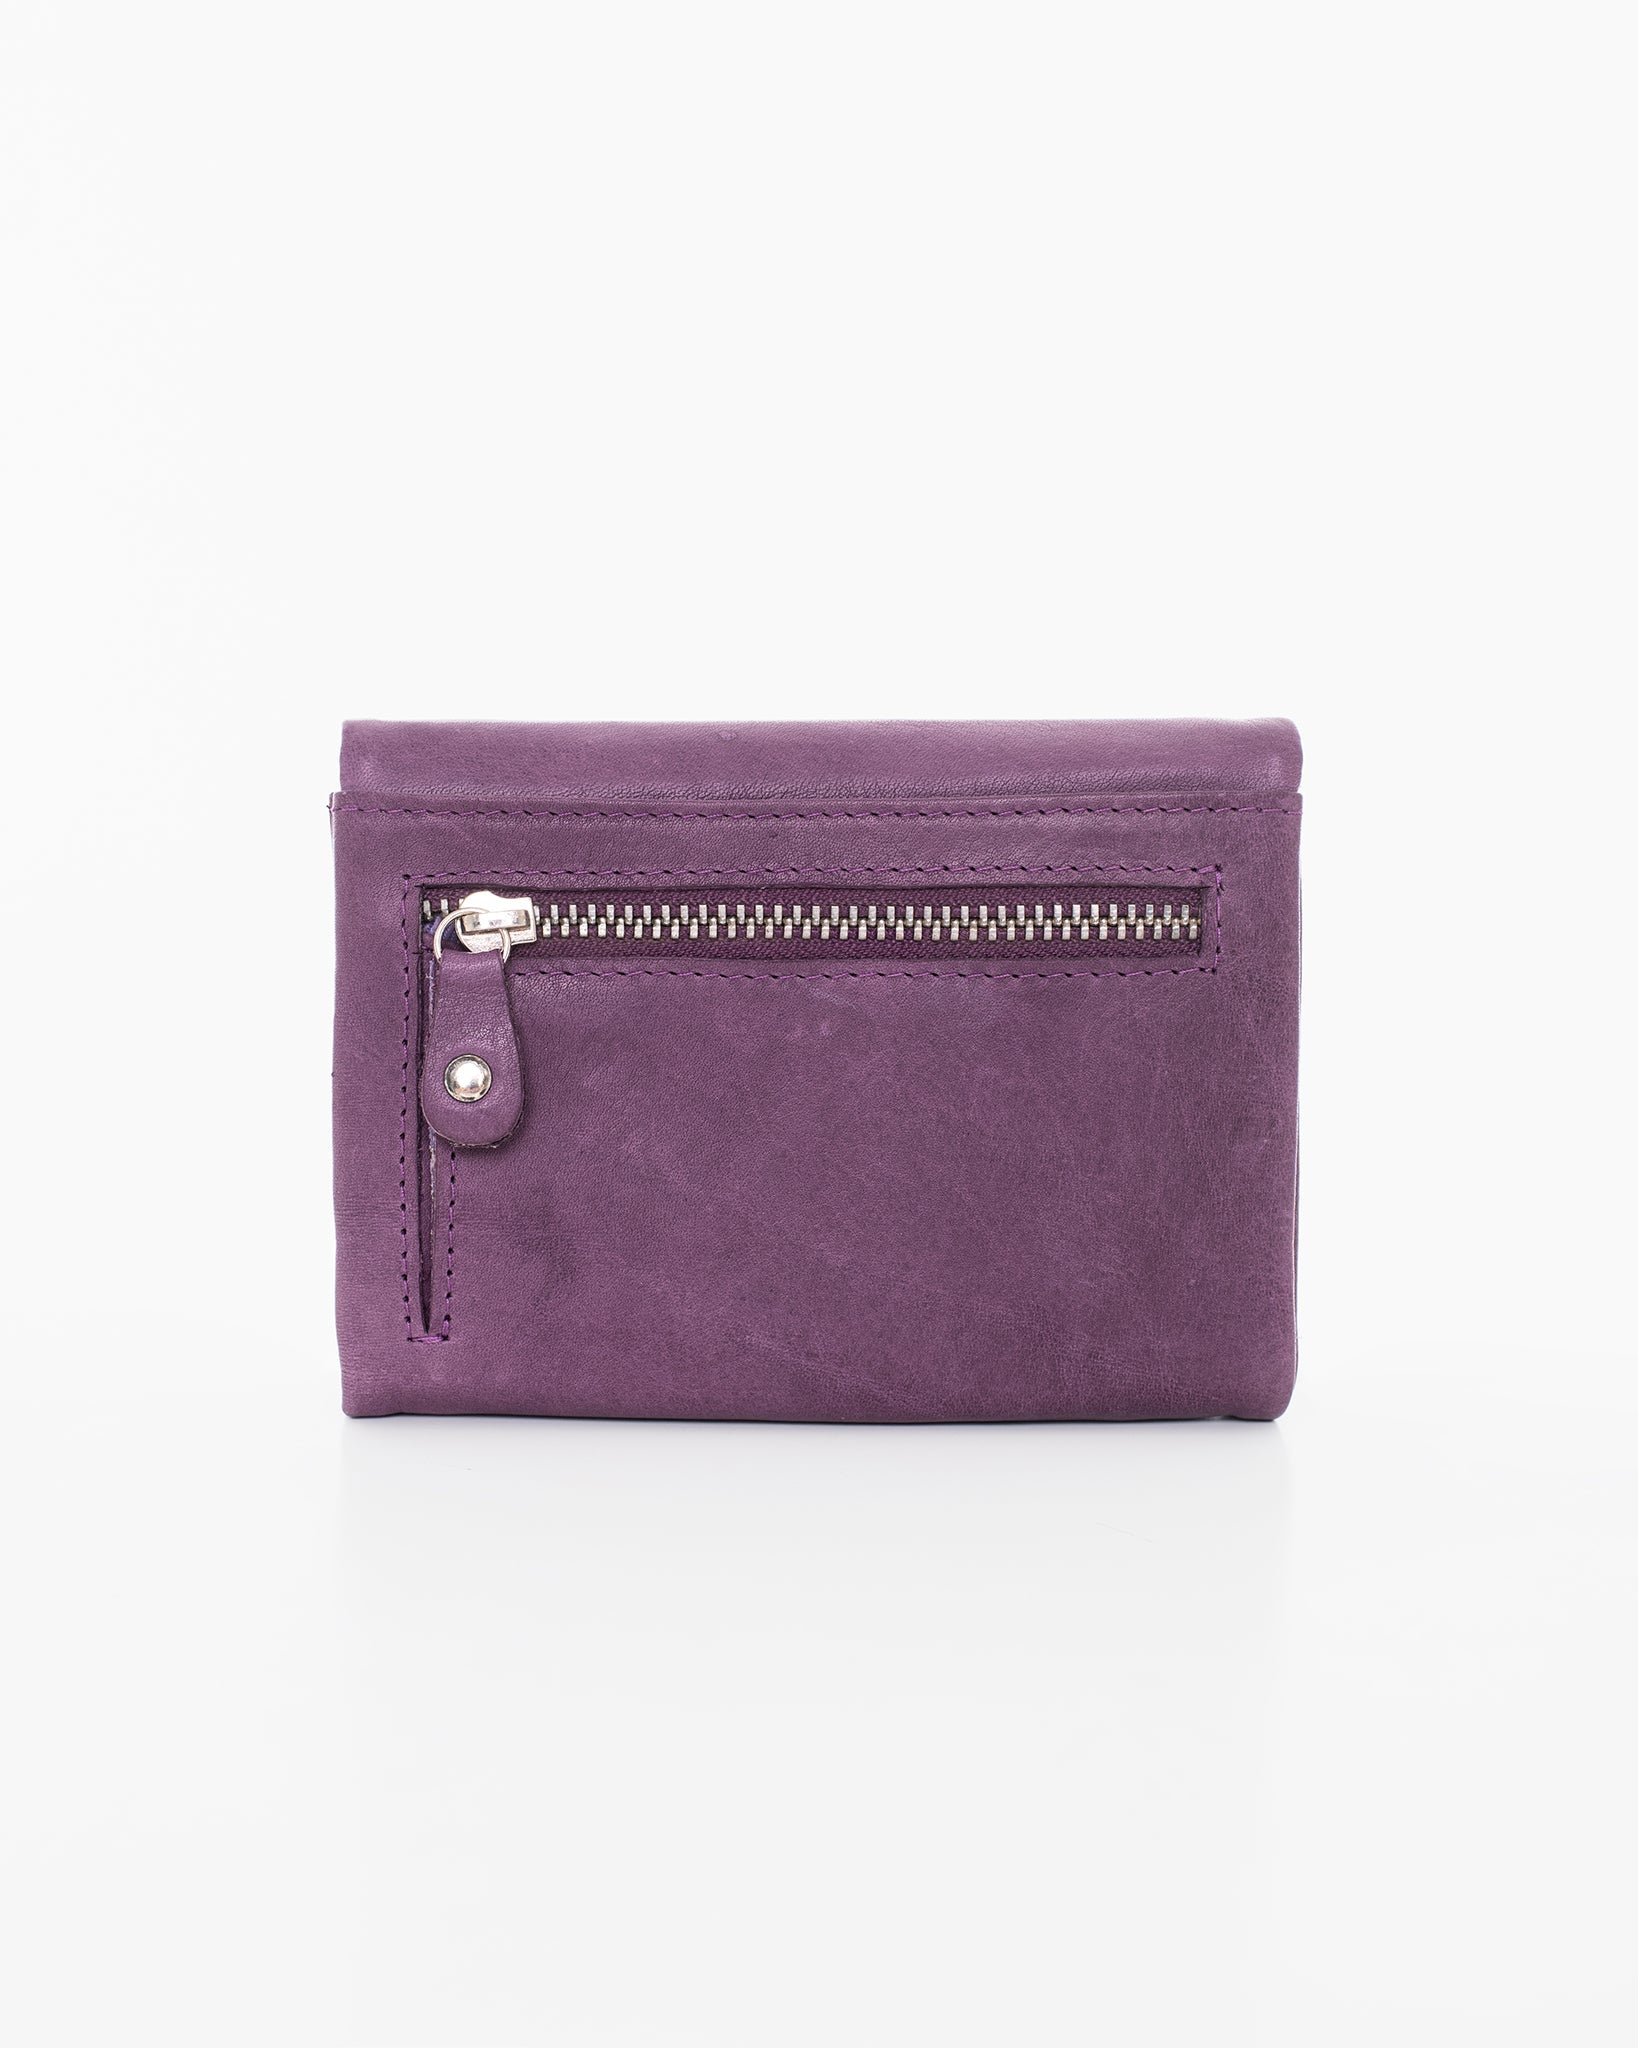 RFID-blocking Leather Wallet in Purple, featuring 12 card slots, bill compartments, coin pocket, and driving license slot. Snap button closure. Dimensions: 12 x 9 x 2.5 cm.